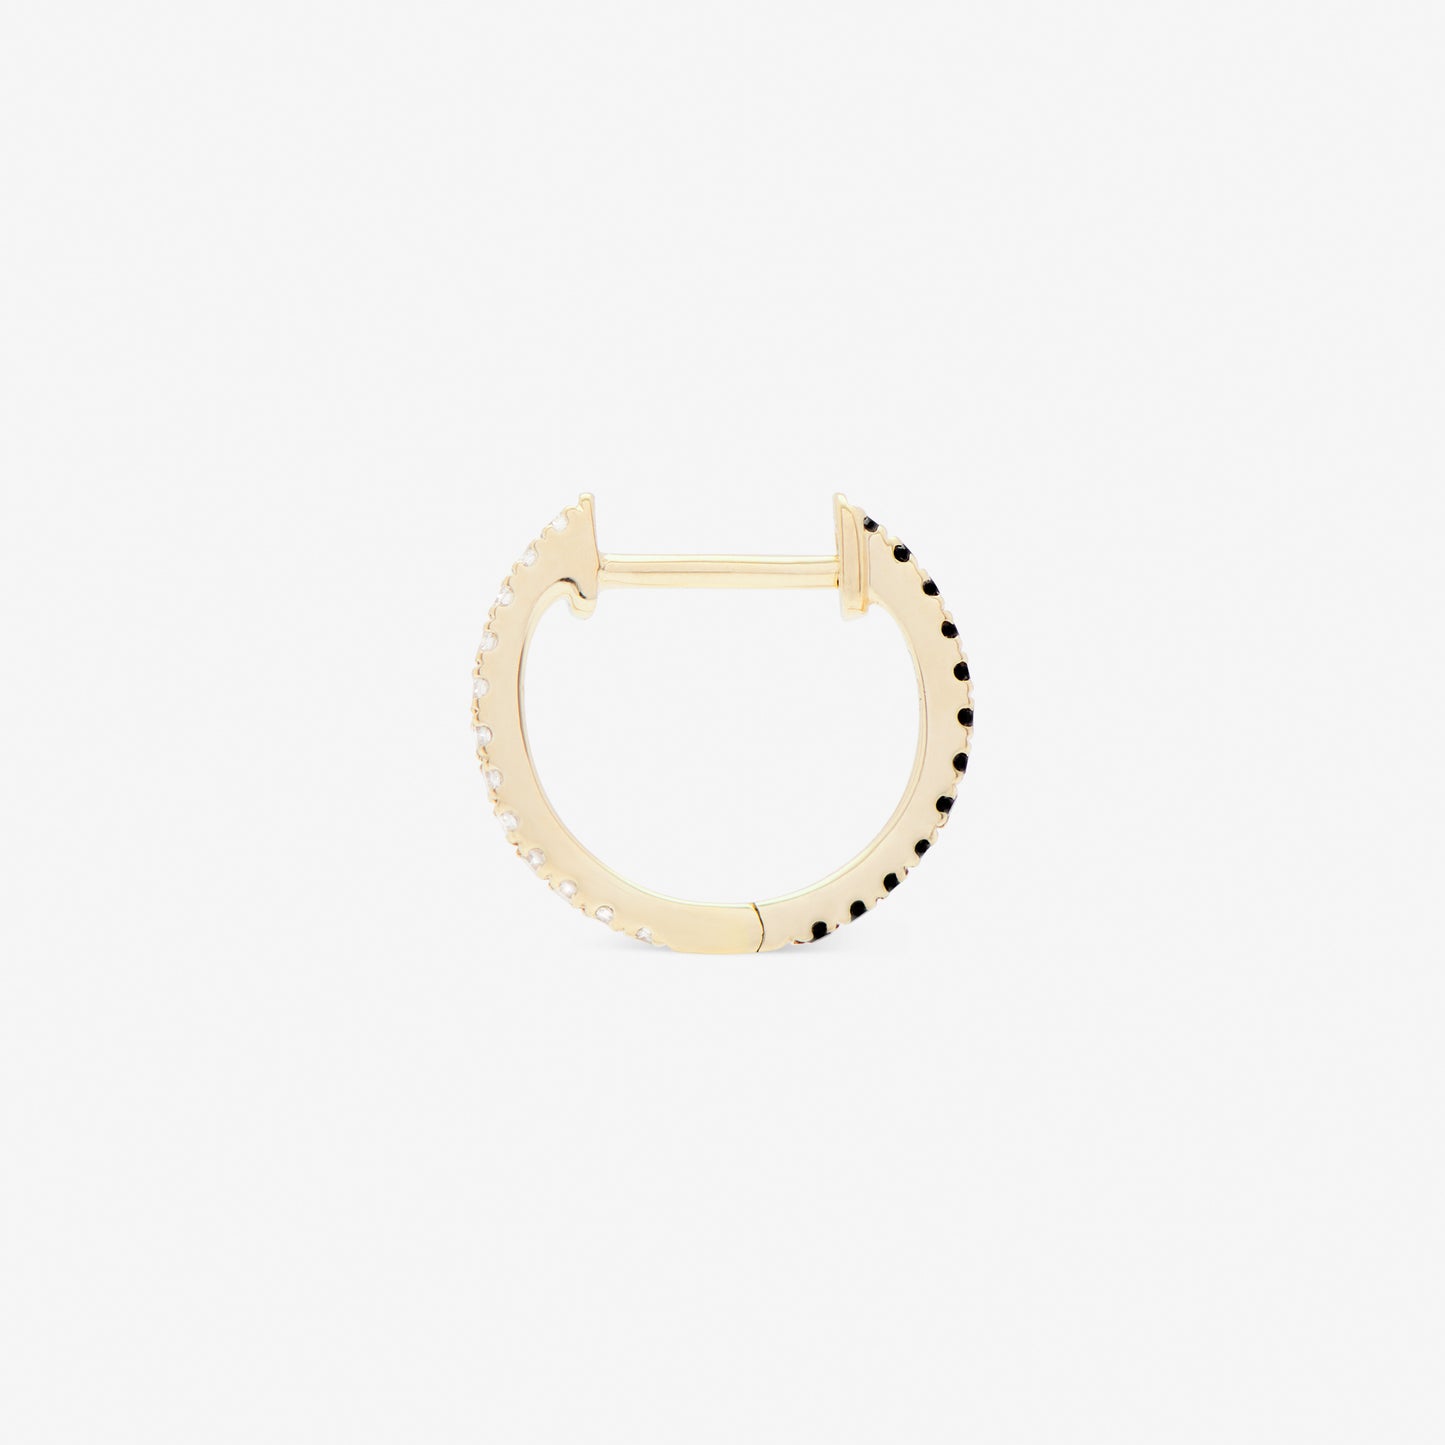 10mm hoop black and white in yellow gold from side